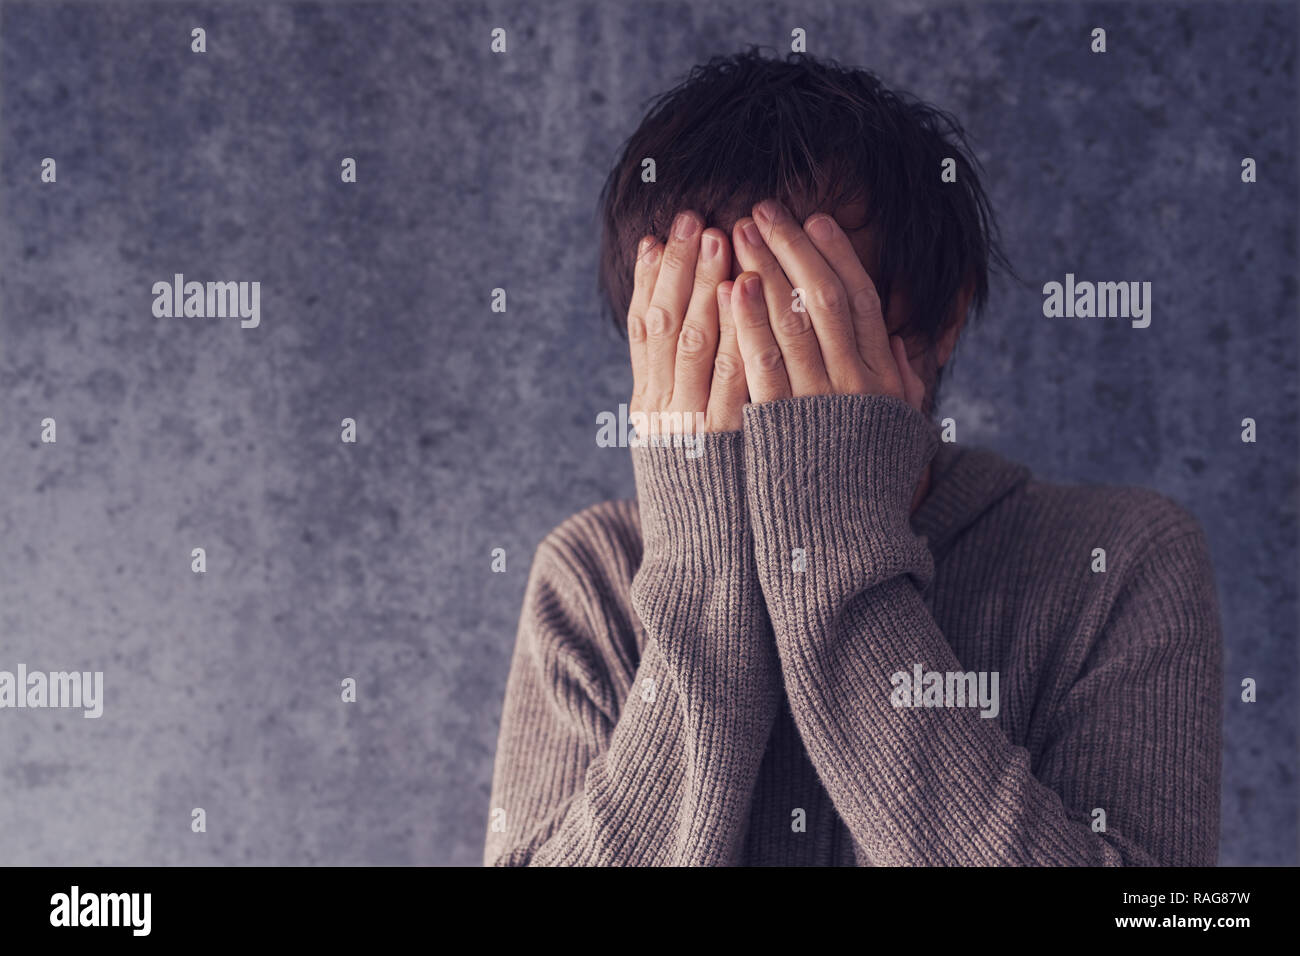 Crying man with face in hands, distraught and sad Stock Photo